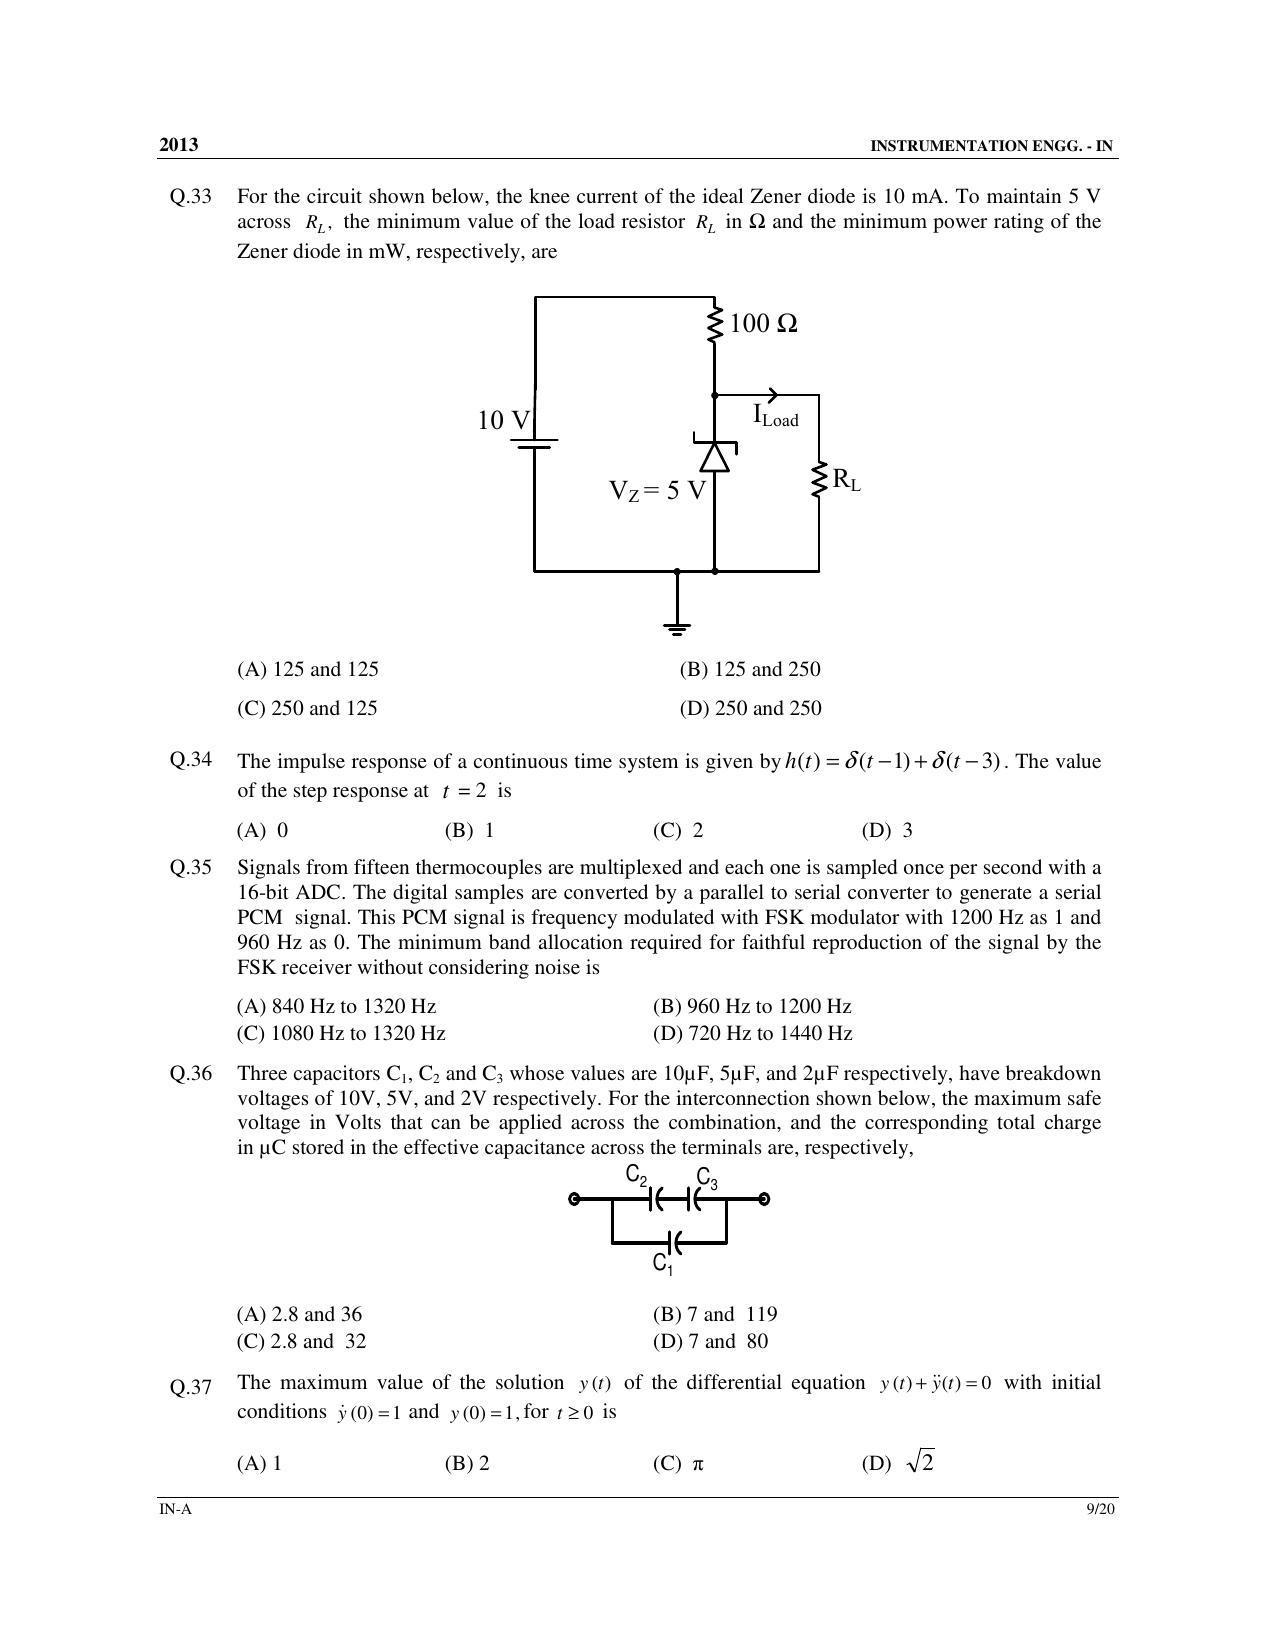 GATE 2013 Instrumentation Engineering (IN) Question Paper with Answer Key - Page 10